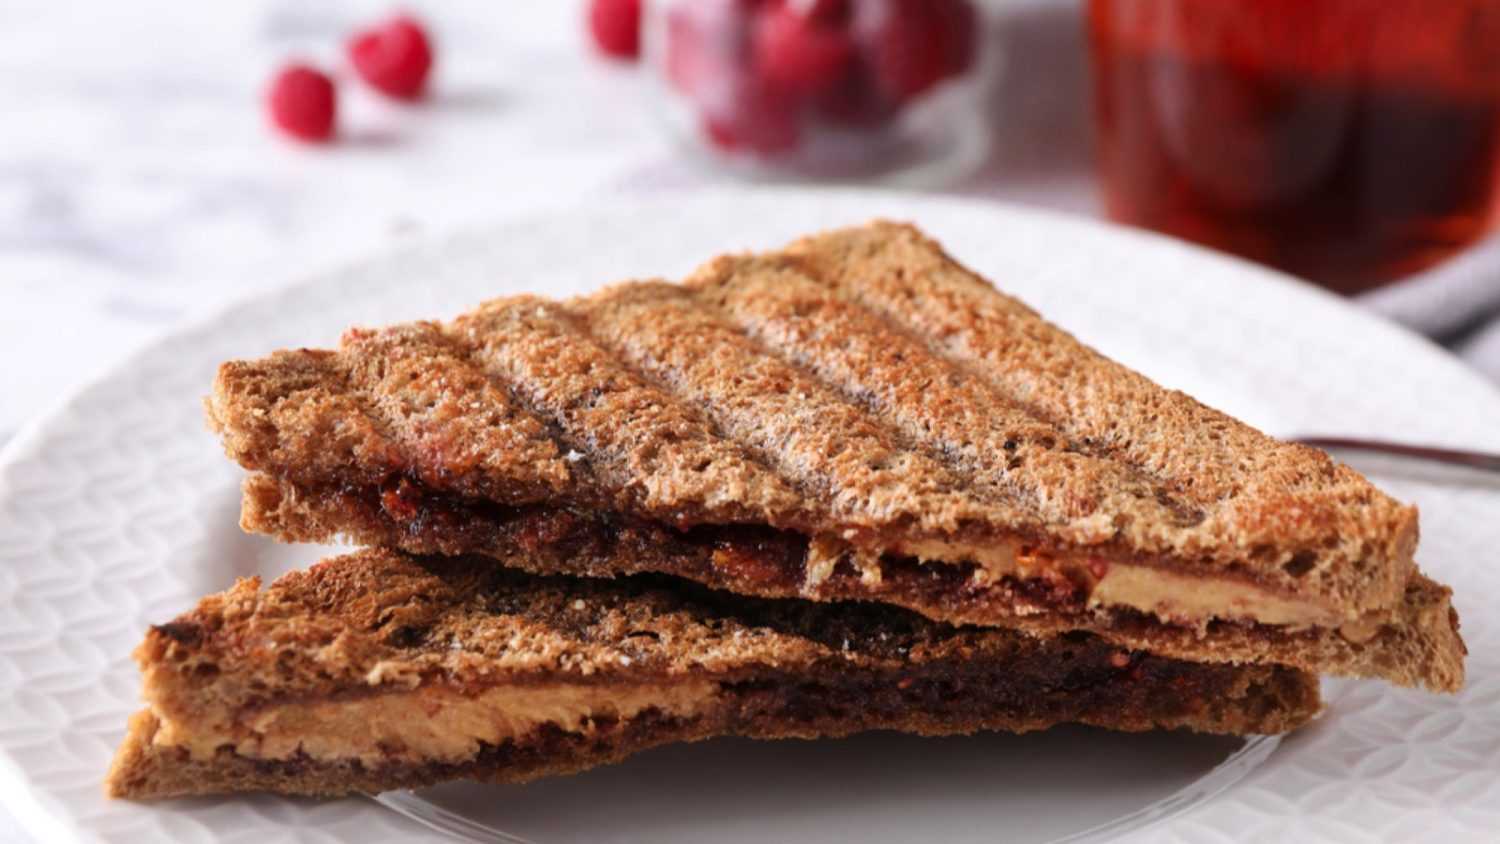 Grilled Peanut butter and jelly sandwich